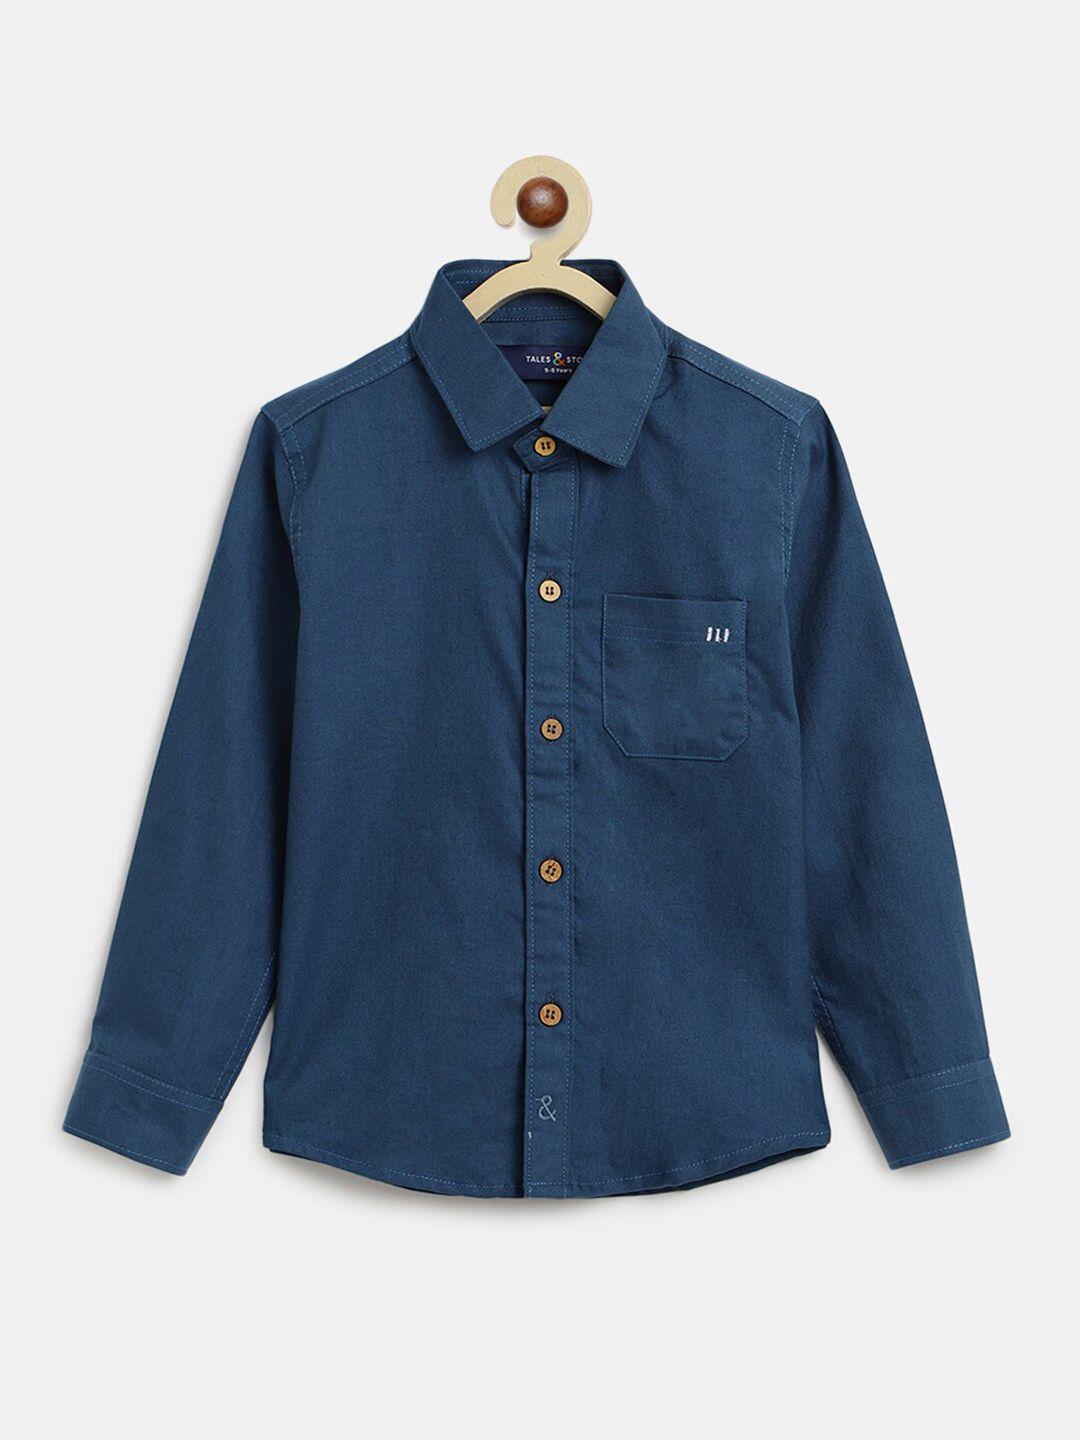 tales & stories boys blue casual shirt